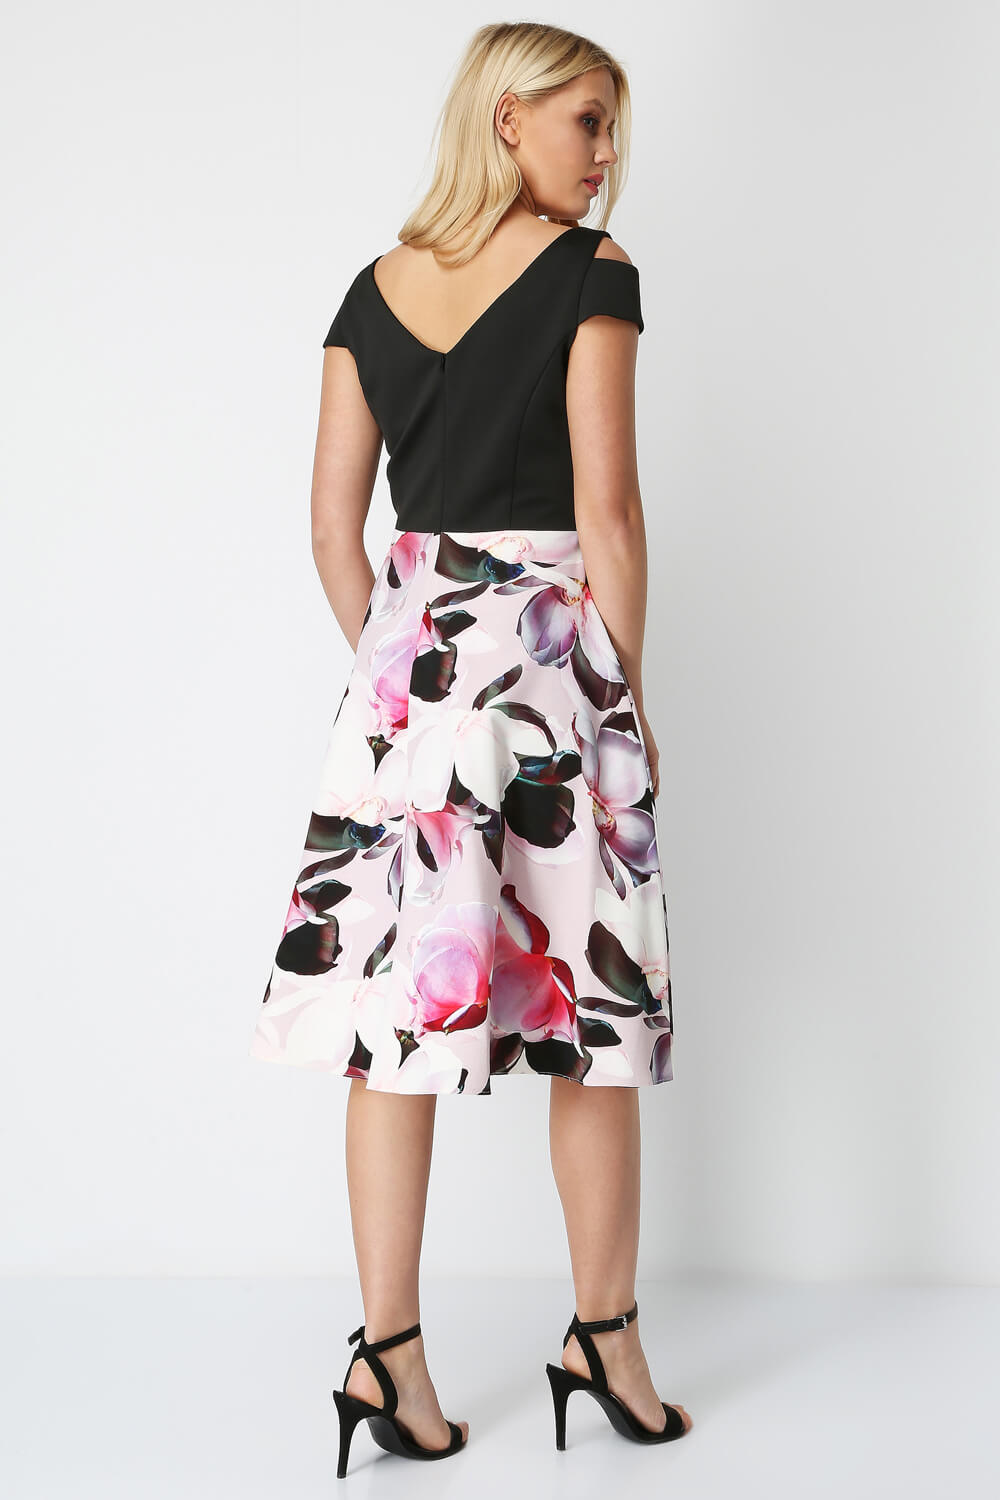 Black Fit and Flare Print Skirt Dress, Image 2 of 4